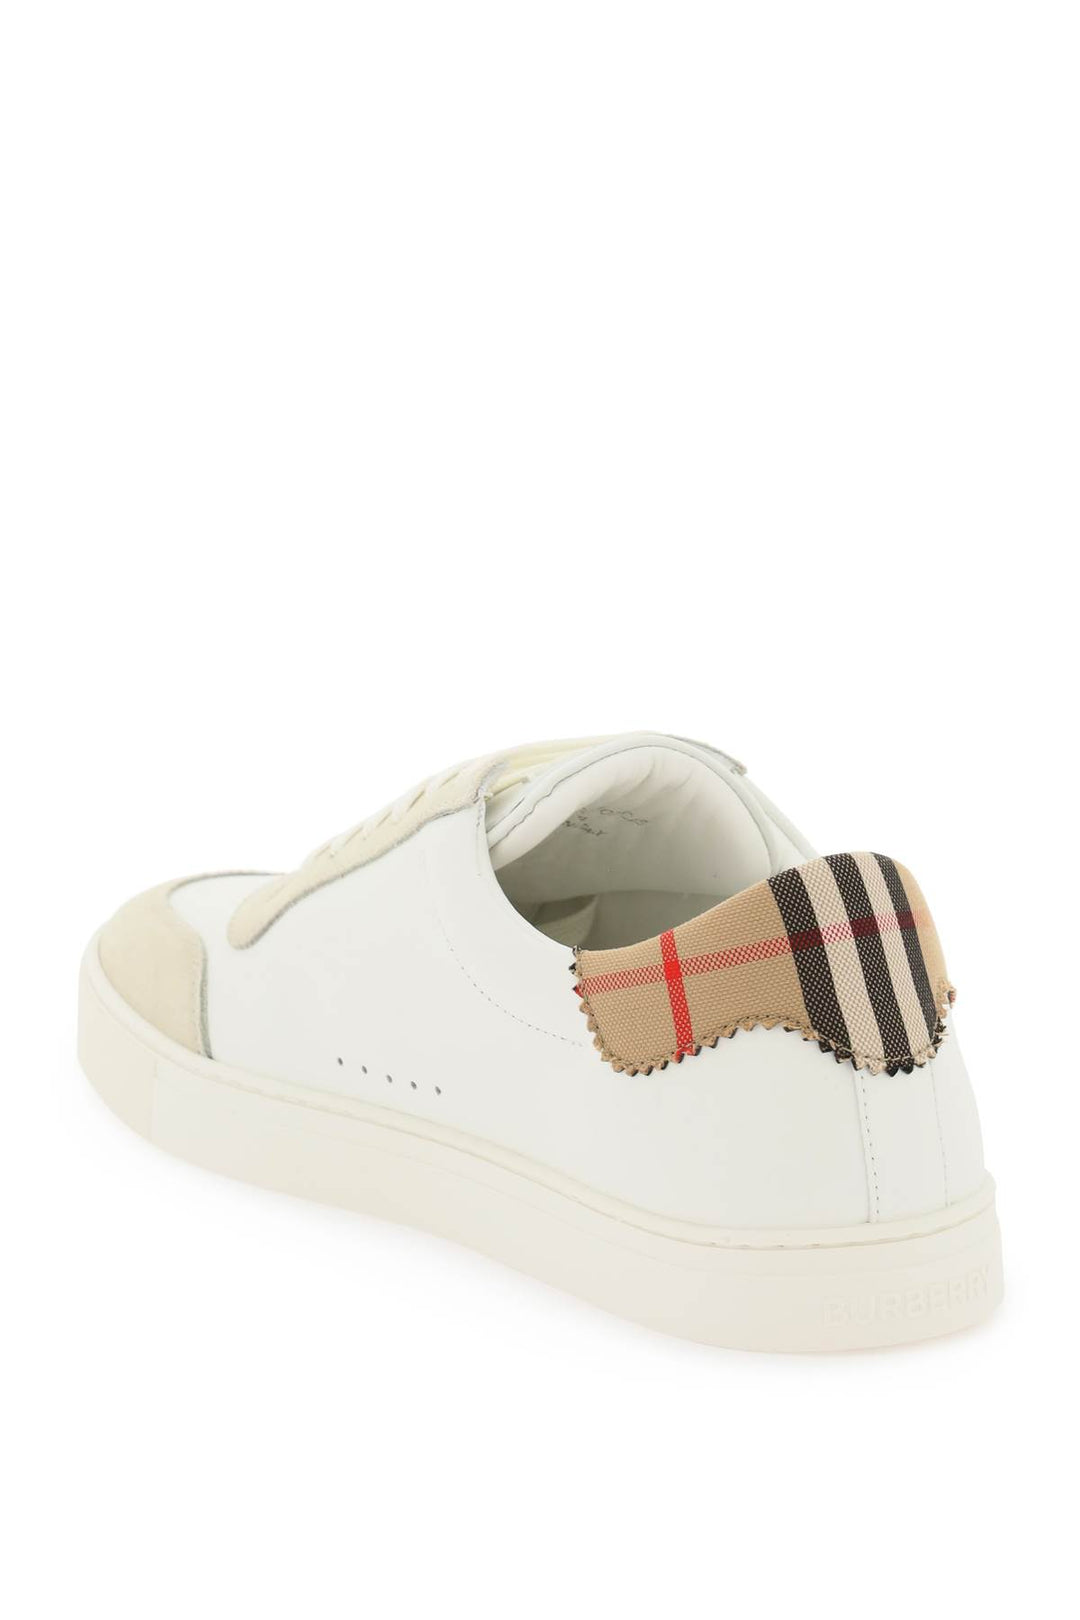 Burberry Low Top Leather Sneakers   Bianco